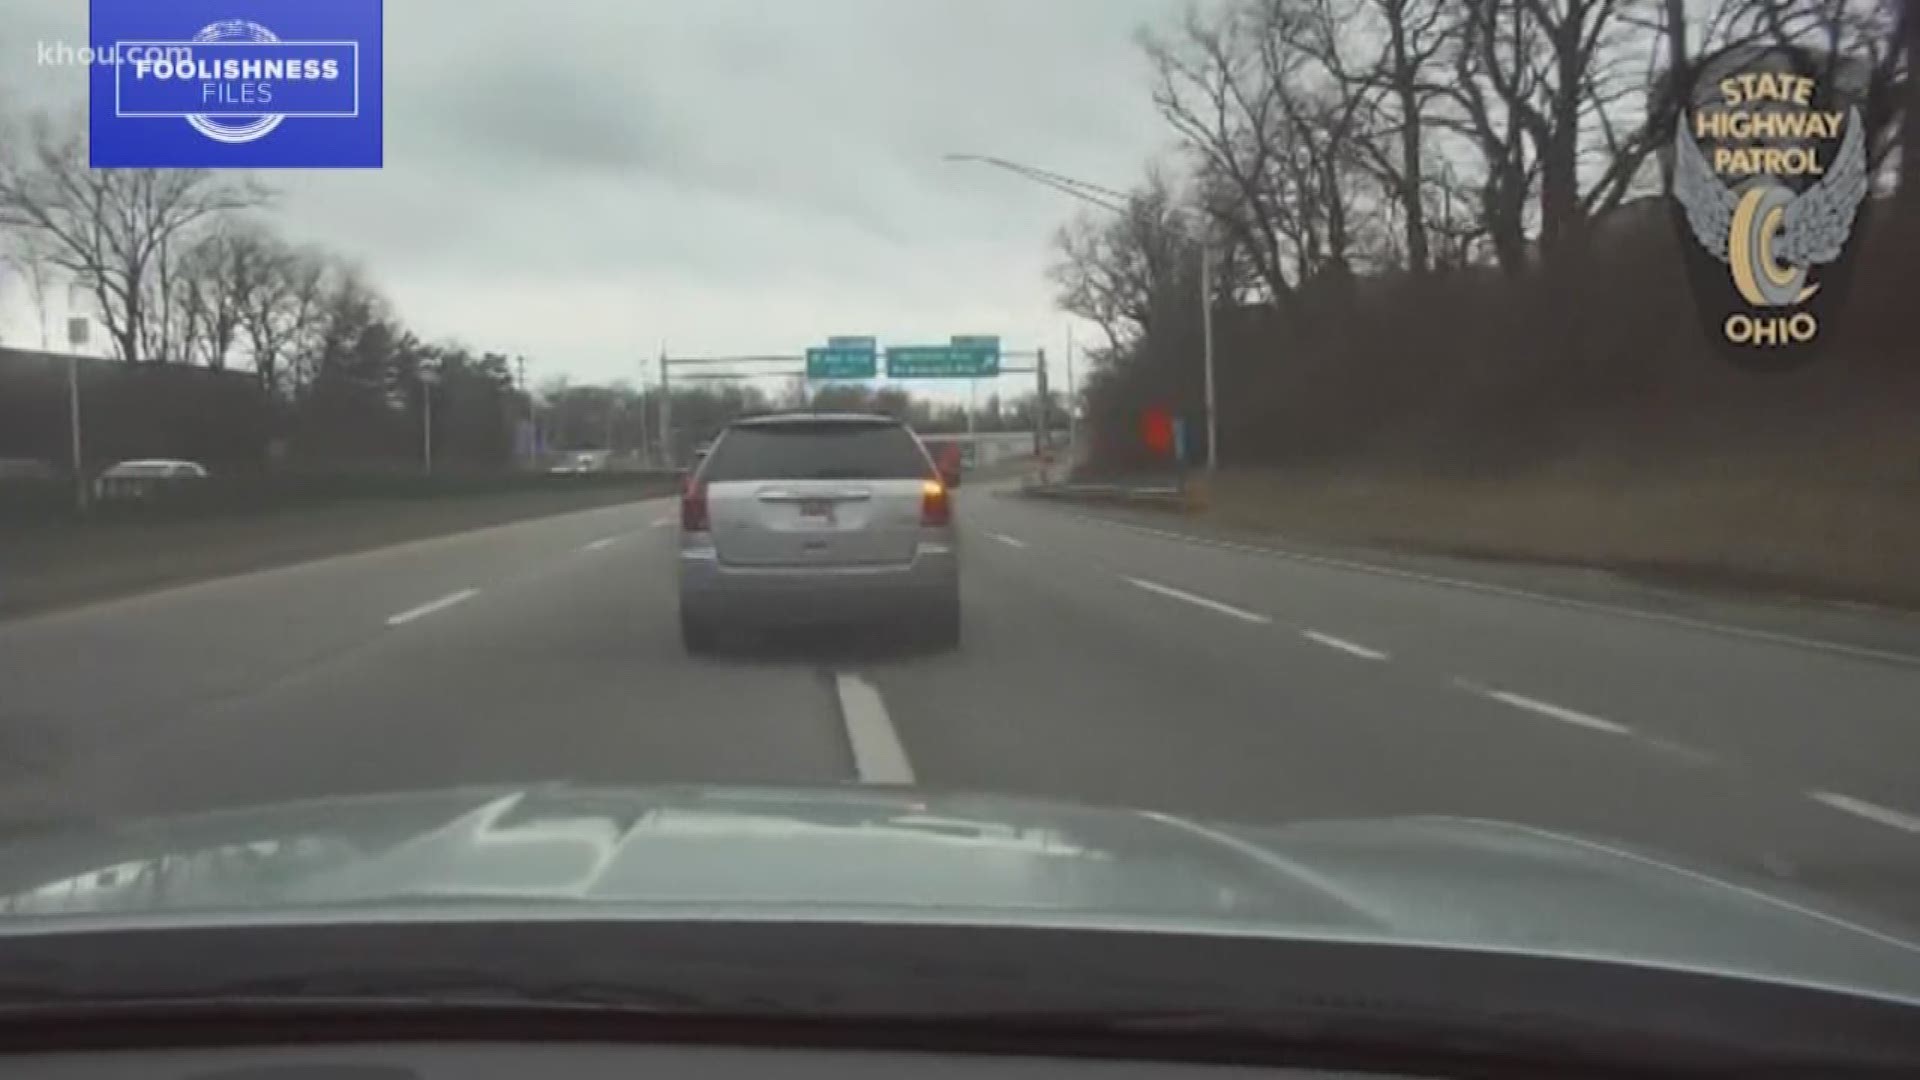 An Ohio State trooper tried to pull over a woman for having dark-tinted windows, but instead of stopping, she took officers on a crazy chase. She told officers she was on her way to work and didn't want to be late.